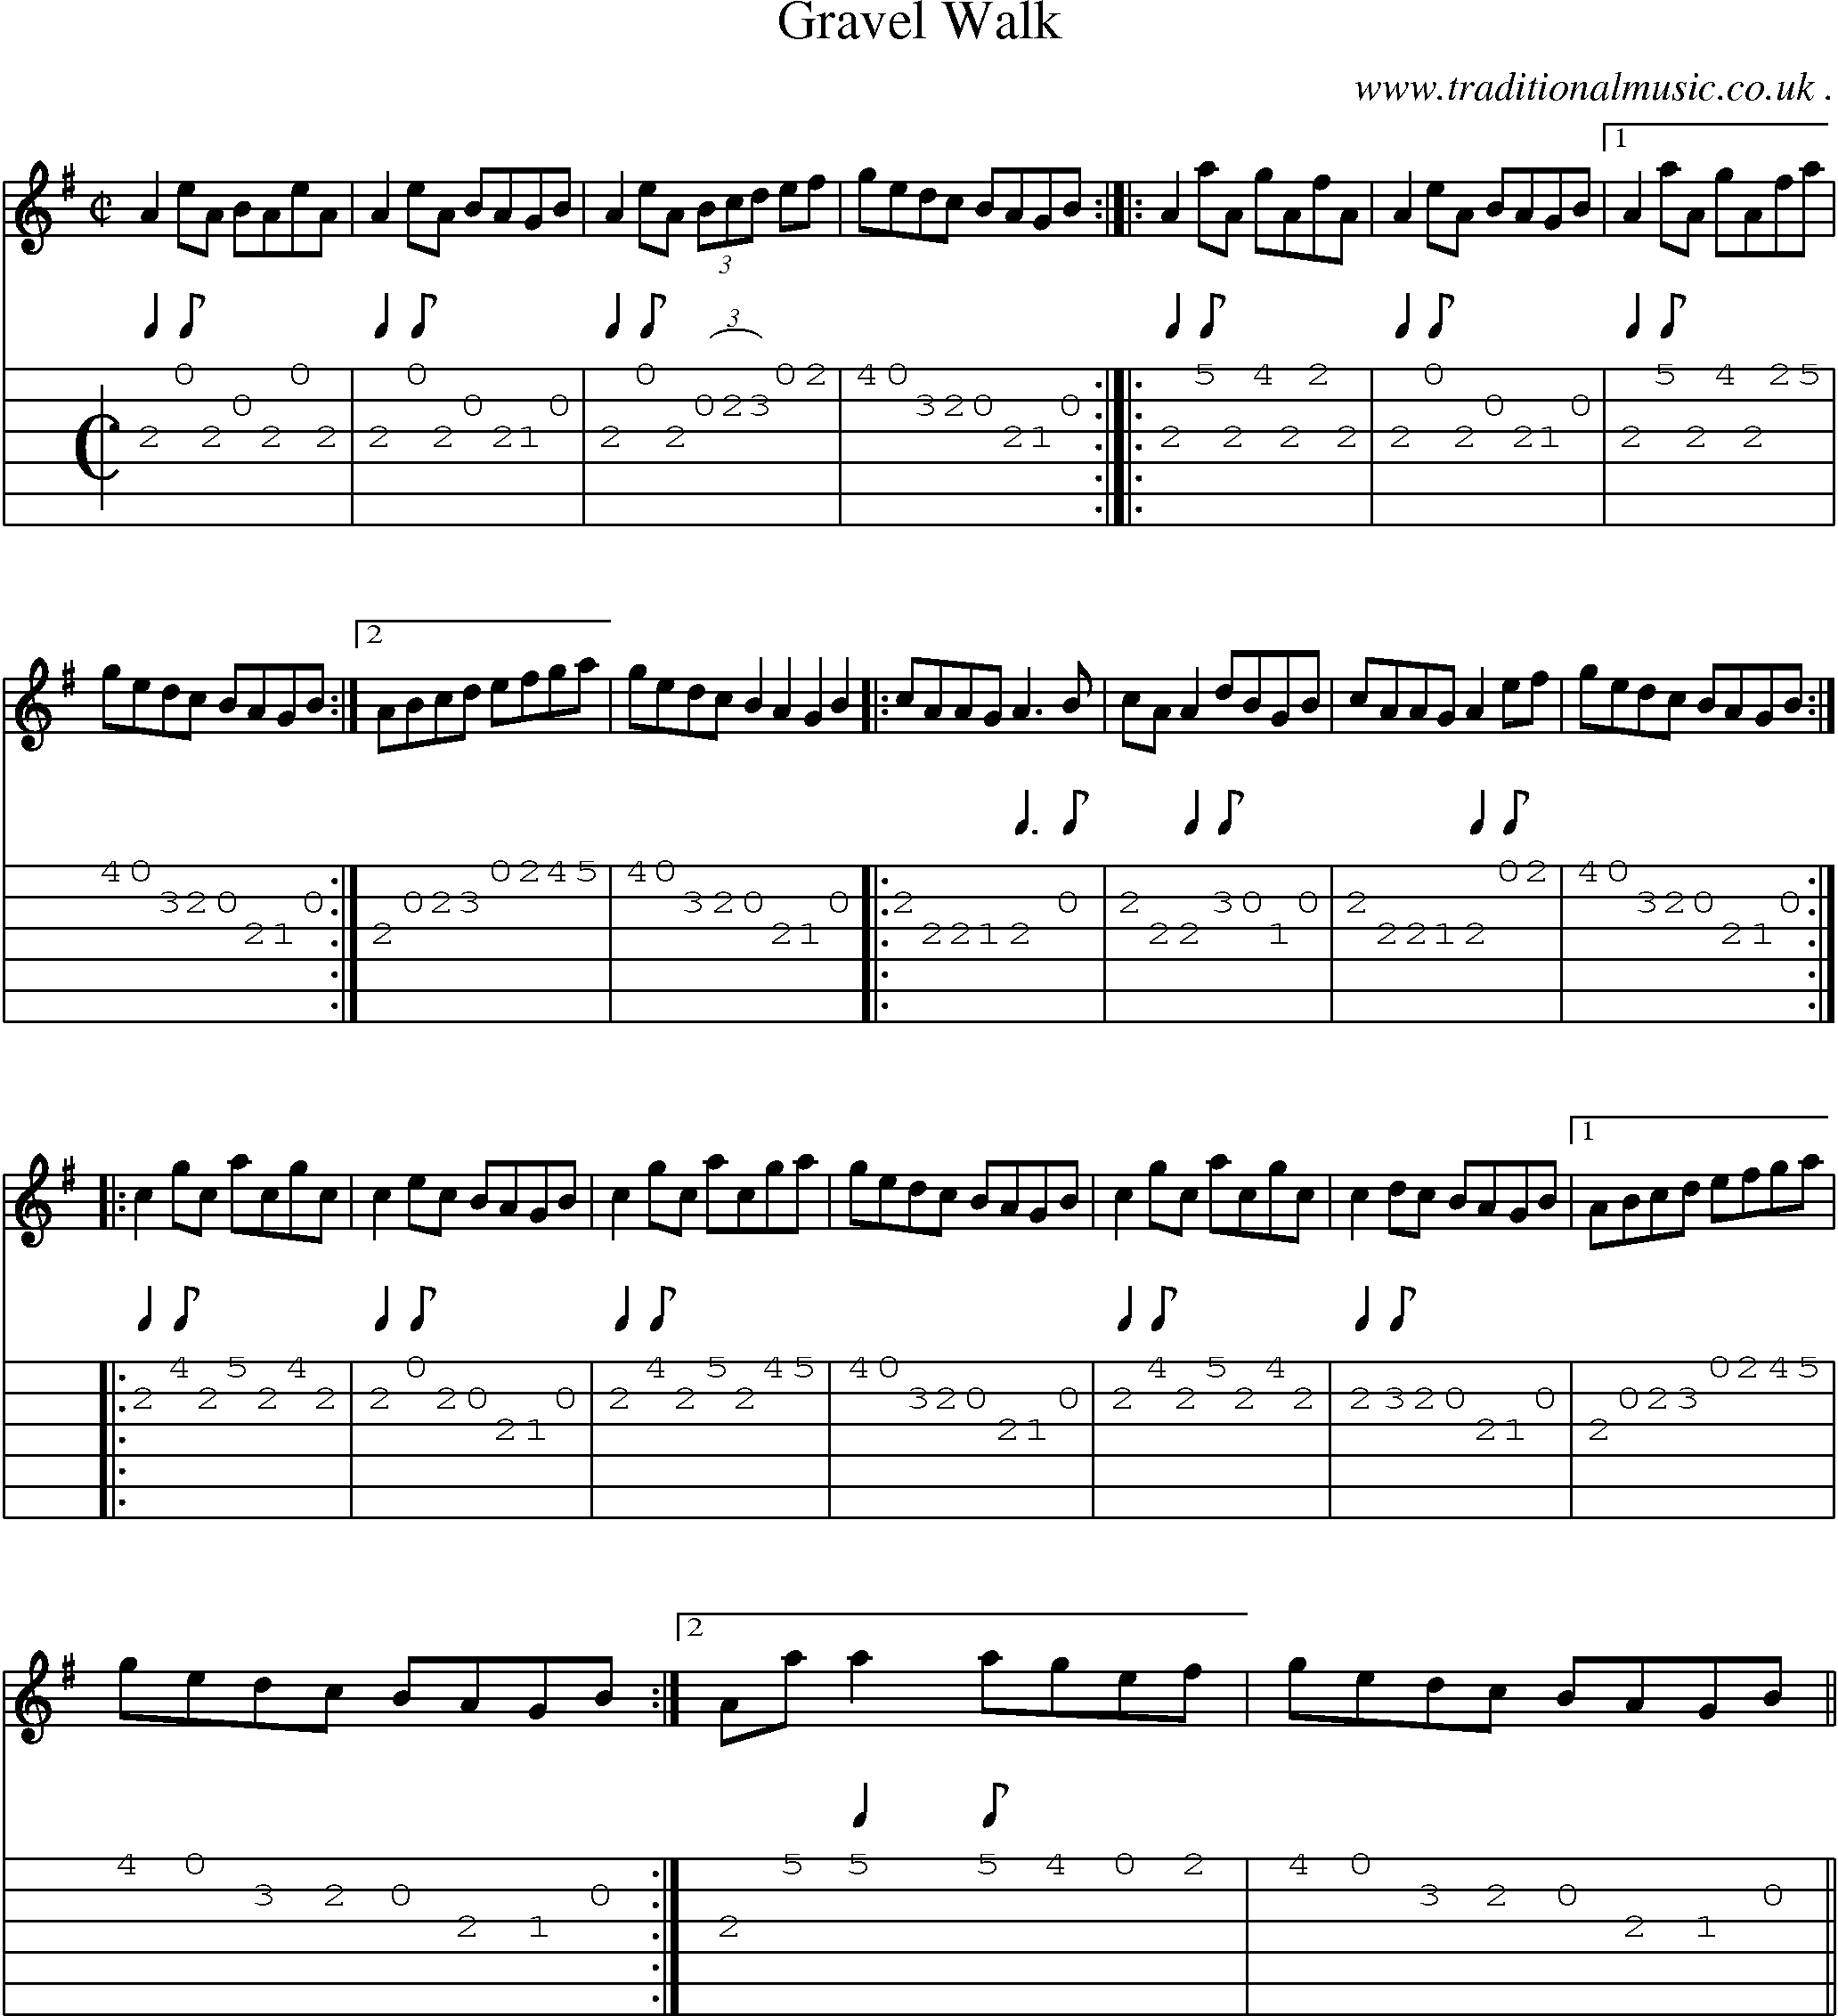 Sheet-Music and Guitar Tabs for Gravel Walk